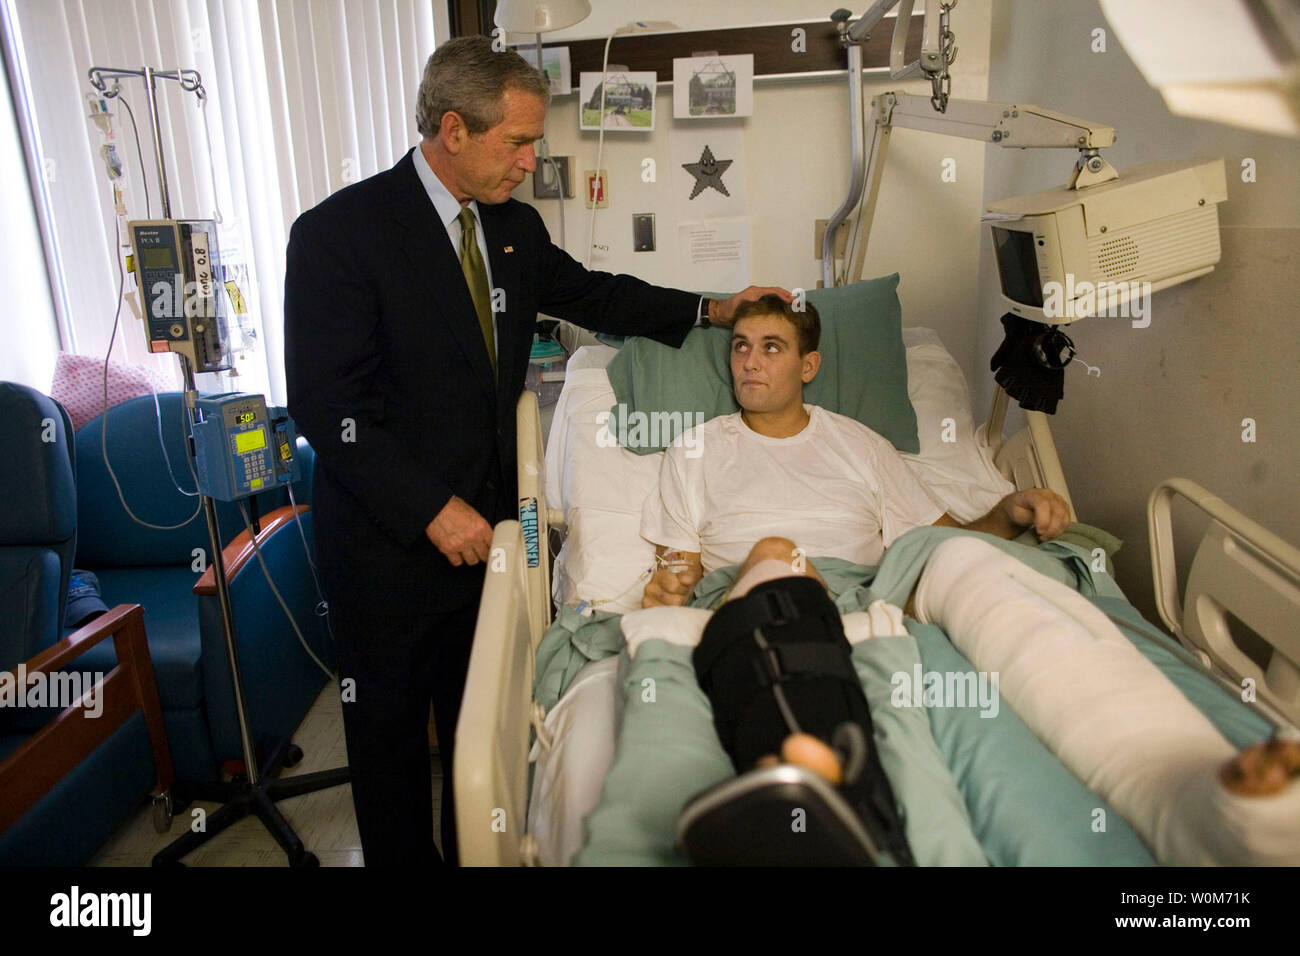 President George W. Bush spends a moment with Cpl. Cole Hansen of Canby, Minn., during a visit to Walter Reed Army Medical Center Friday, July 1, 2005.Ê Cpl. Hansen is recovering from wounds received while serving in Iraq.Ê    (UPI Photo/Eric Draper/White House) Stock Photo